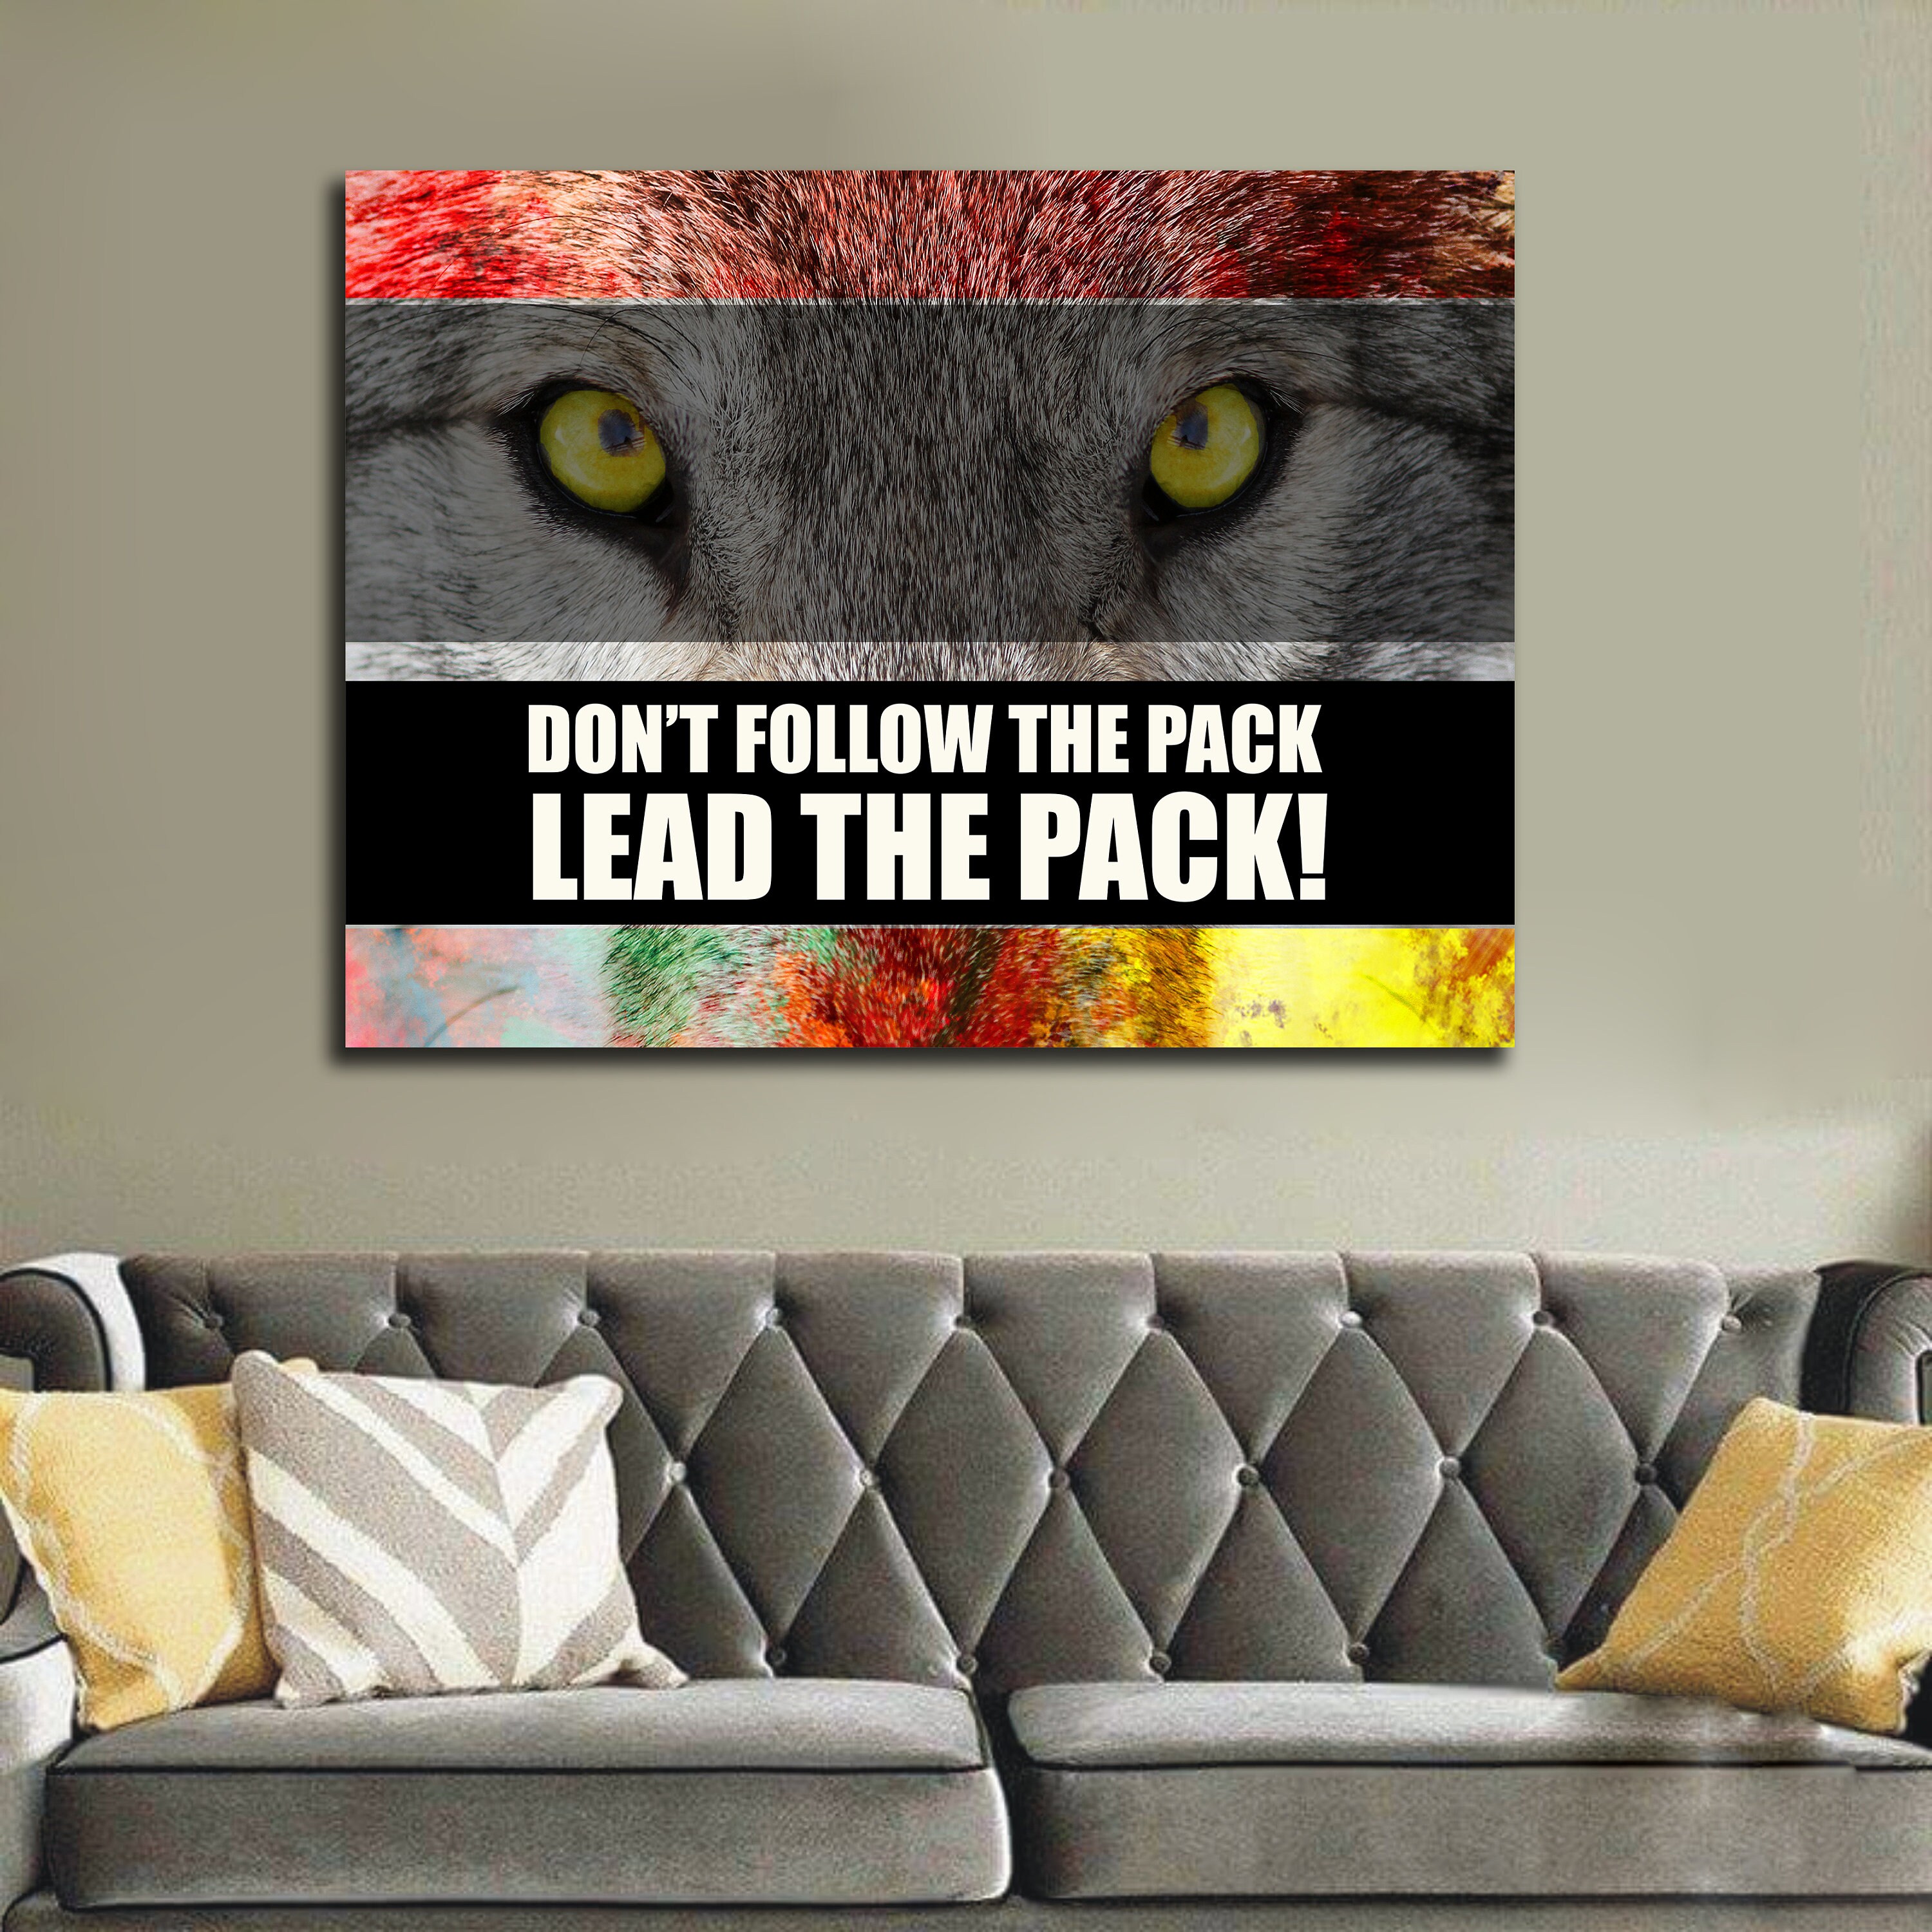 Don't Follow the Pack Lead the Pack, Canvas Wall Art, Motivational Art,  Wolf Art, Lead the Pack, Motivational Quote, Success Quote 